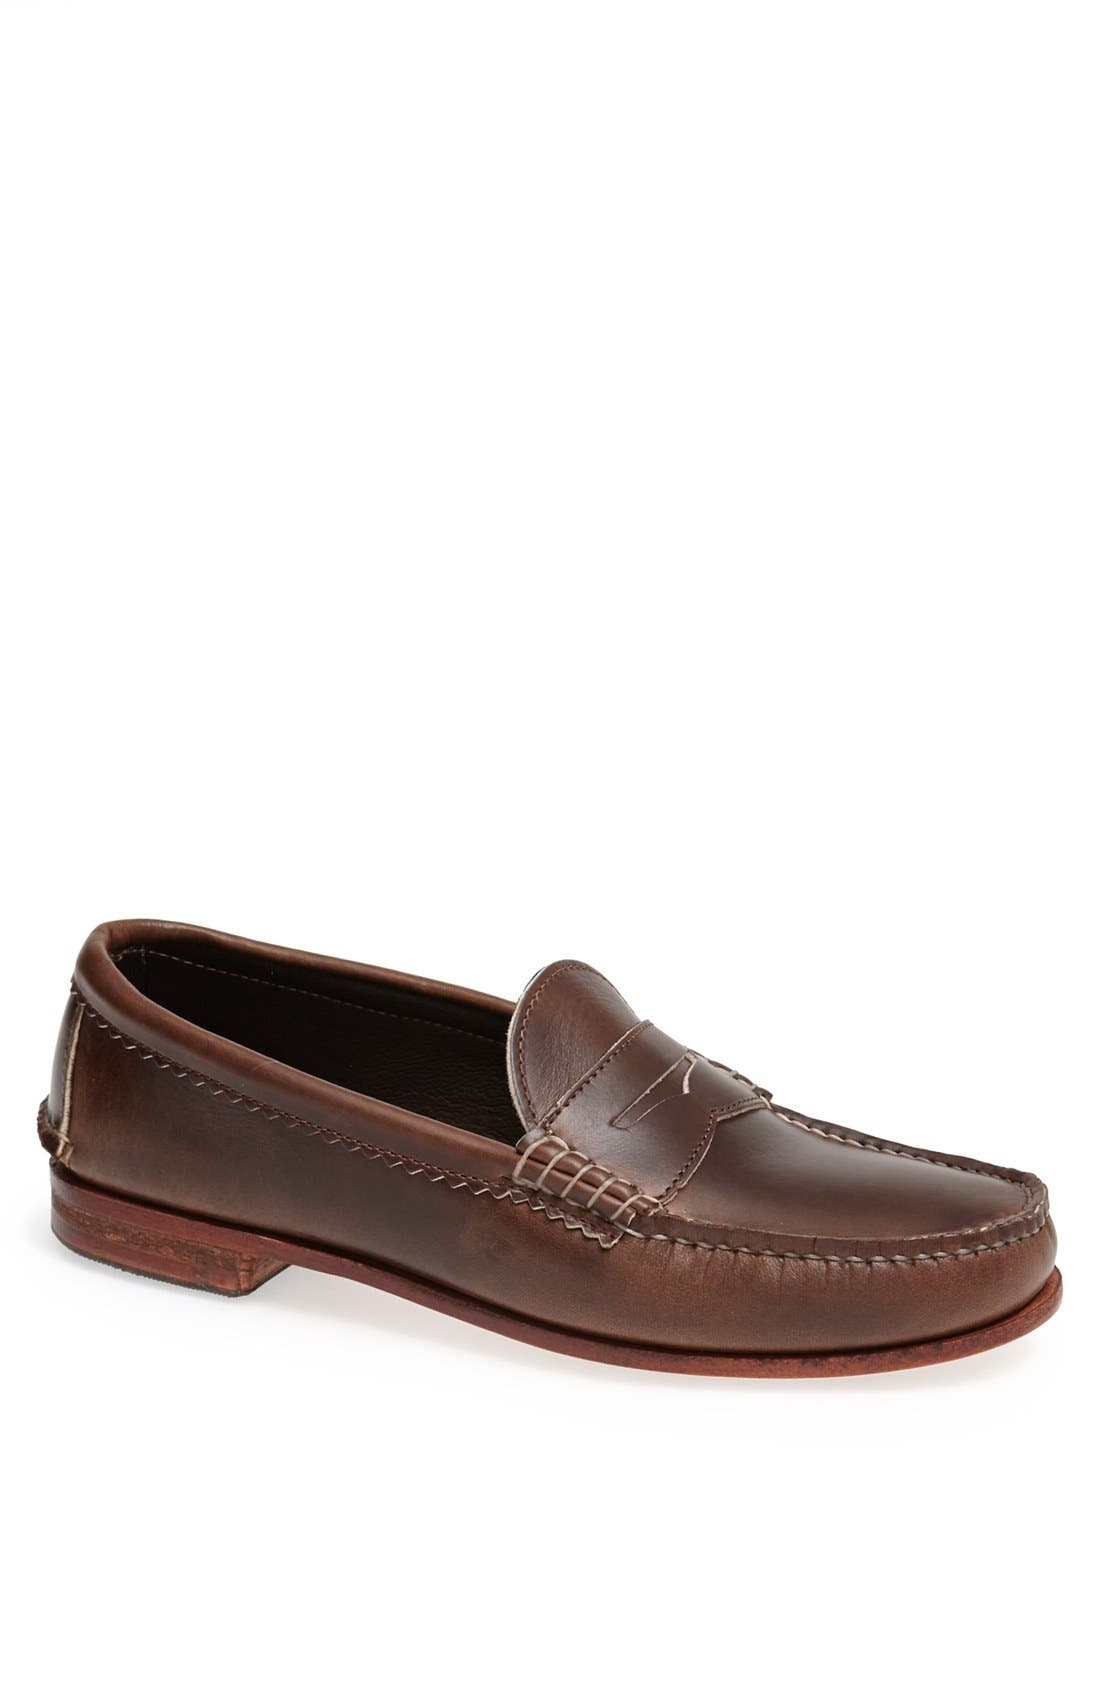 quoddy penny loafer